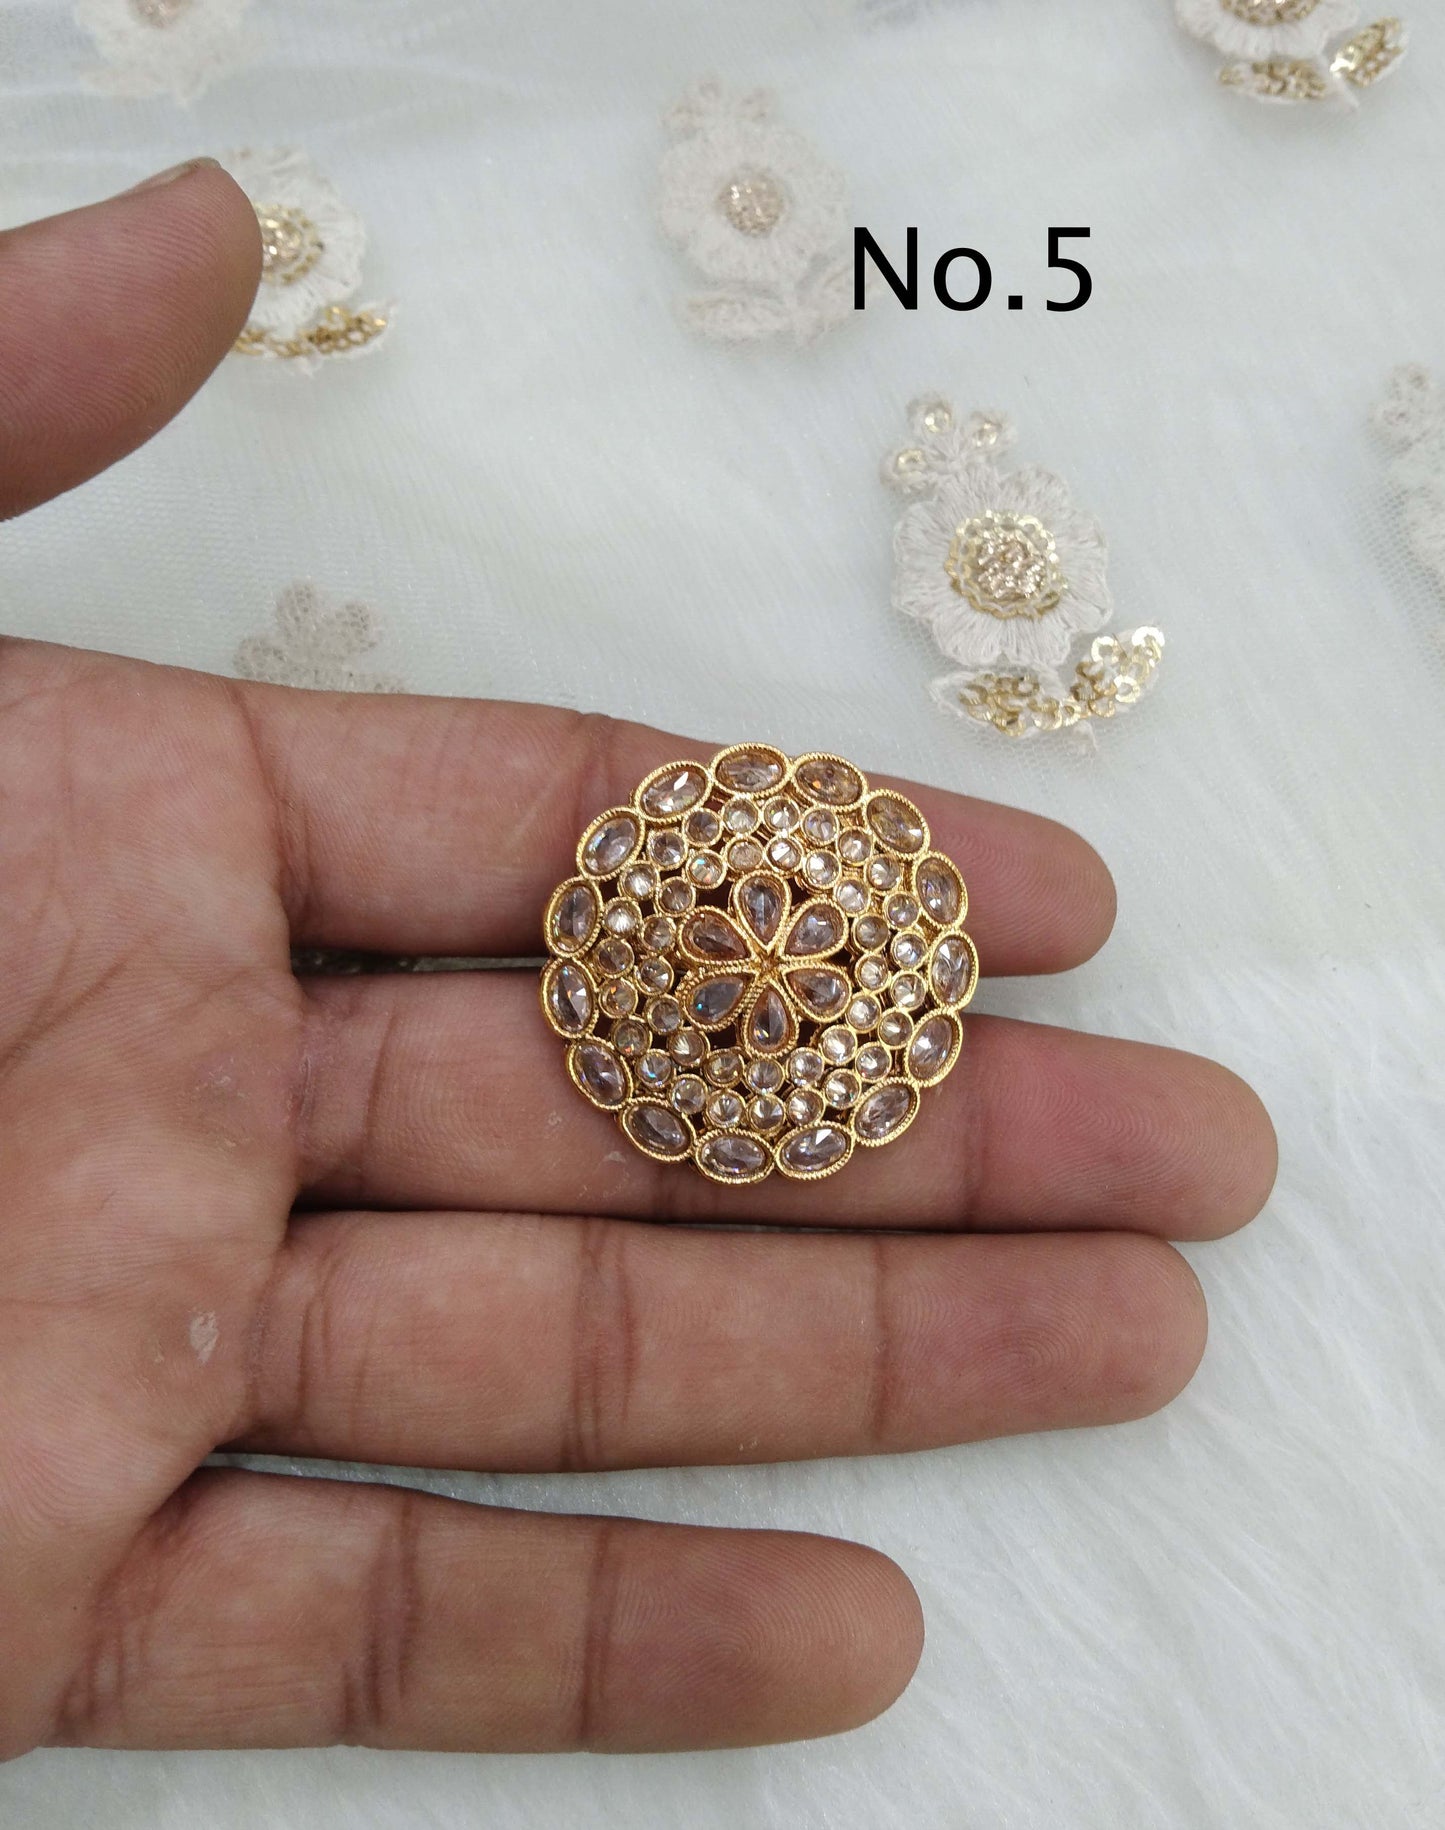 Indian Ring /gold finish Finger rings round bridal ring hand accessory/hki